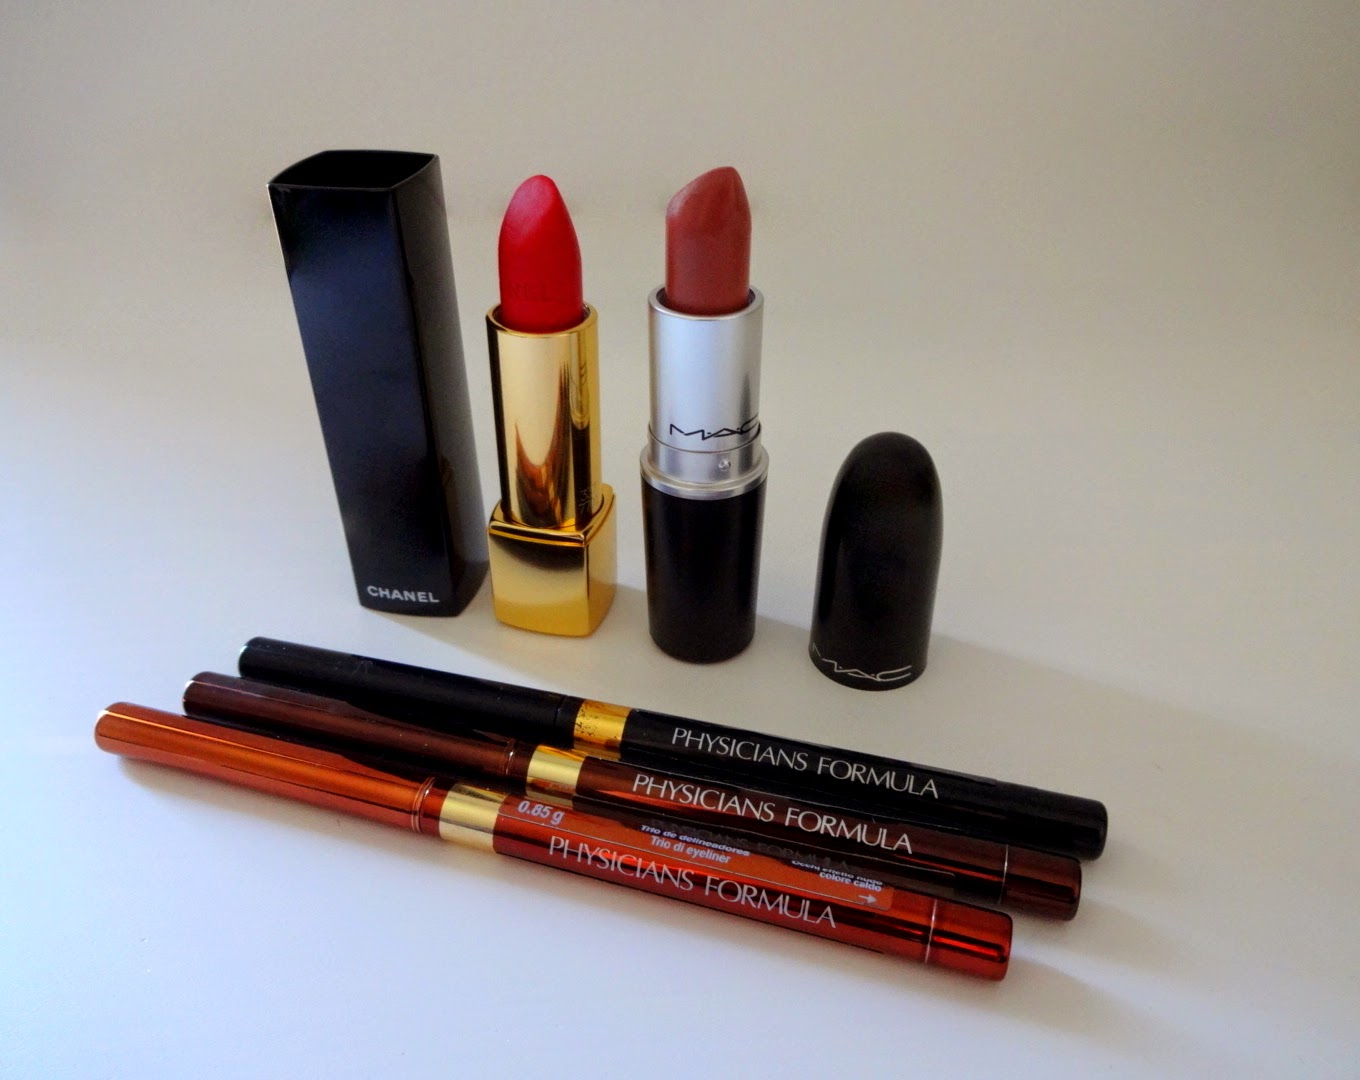 make up, trucco, rossetto rosso, rossetto nude, mac velvet teddy, chanel rouge allure velvet la flamboyante, chanel make up christmas collection 2014, physician's formula